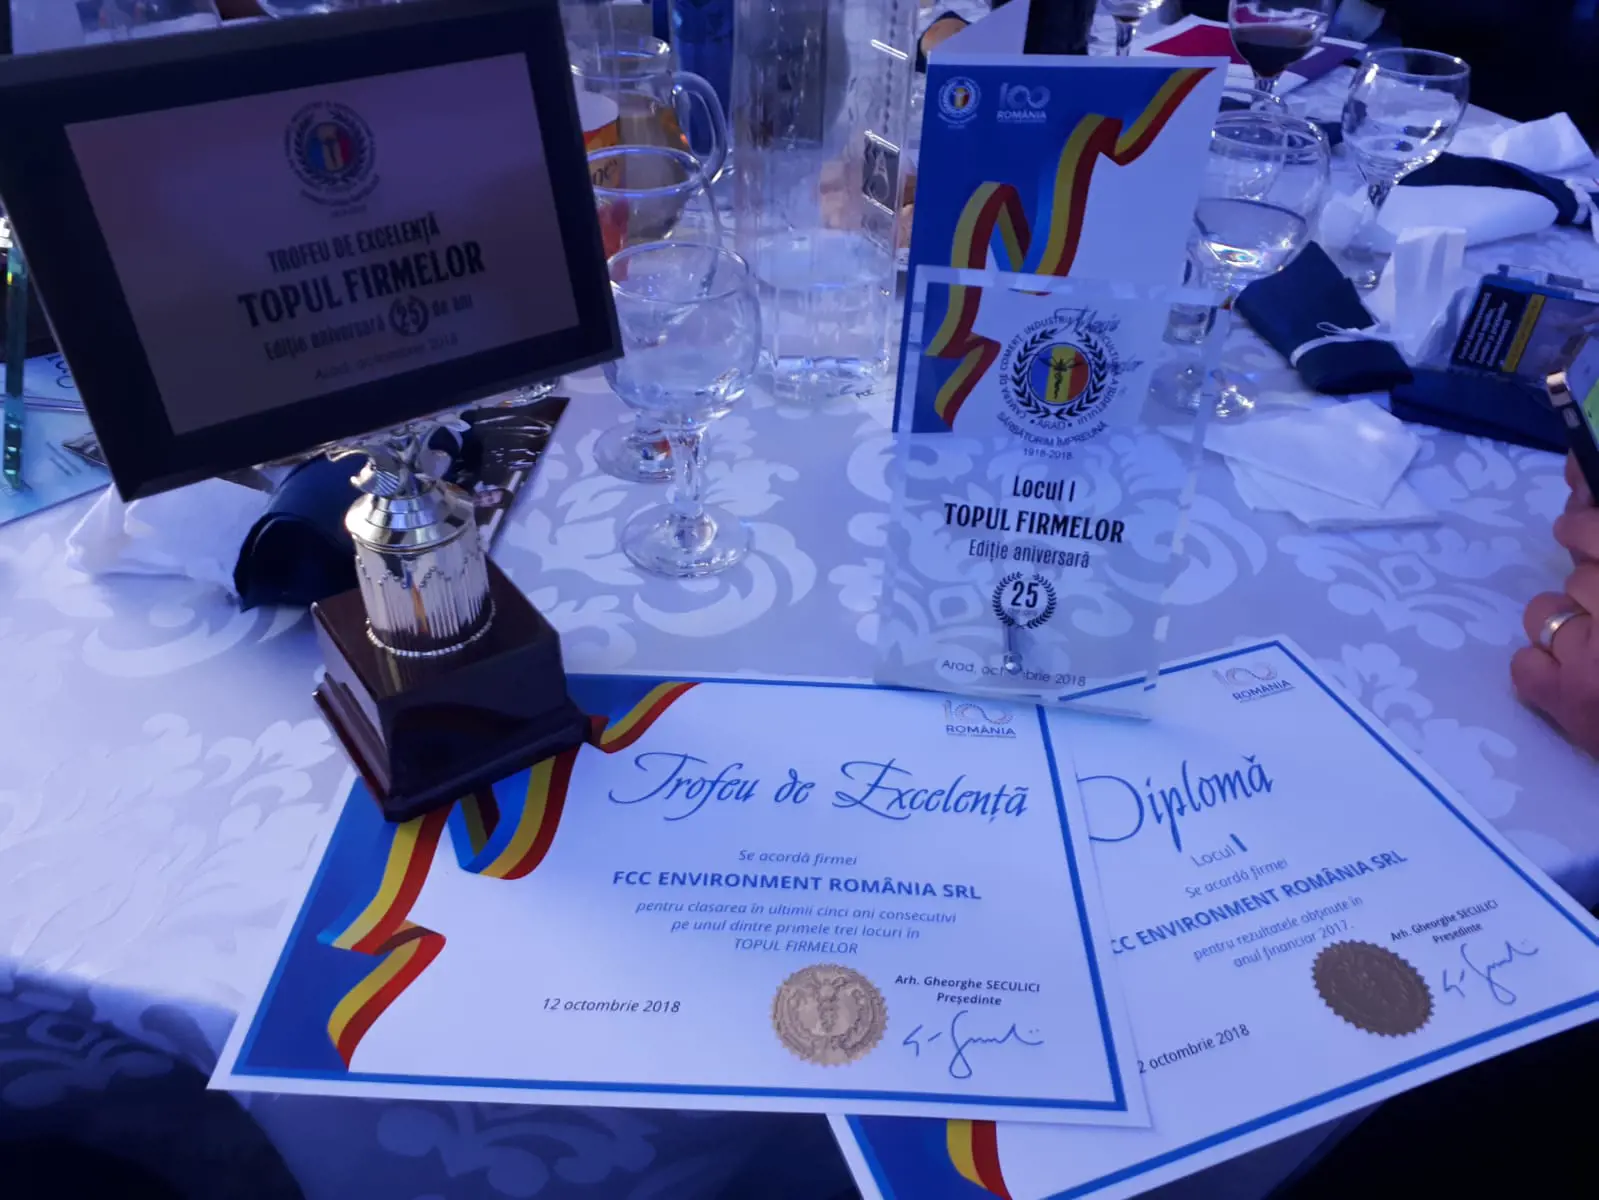 FCC Environment Romania – Sponsor and winner at the Business Environment Awards Gala in Arad